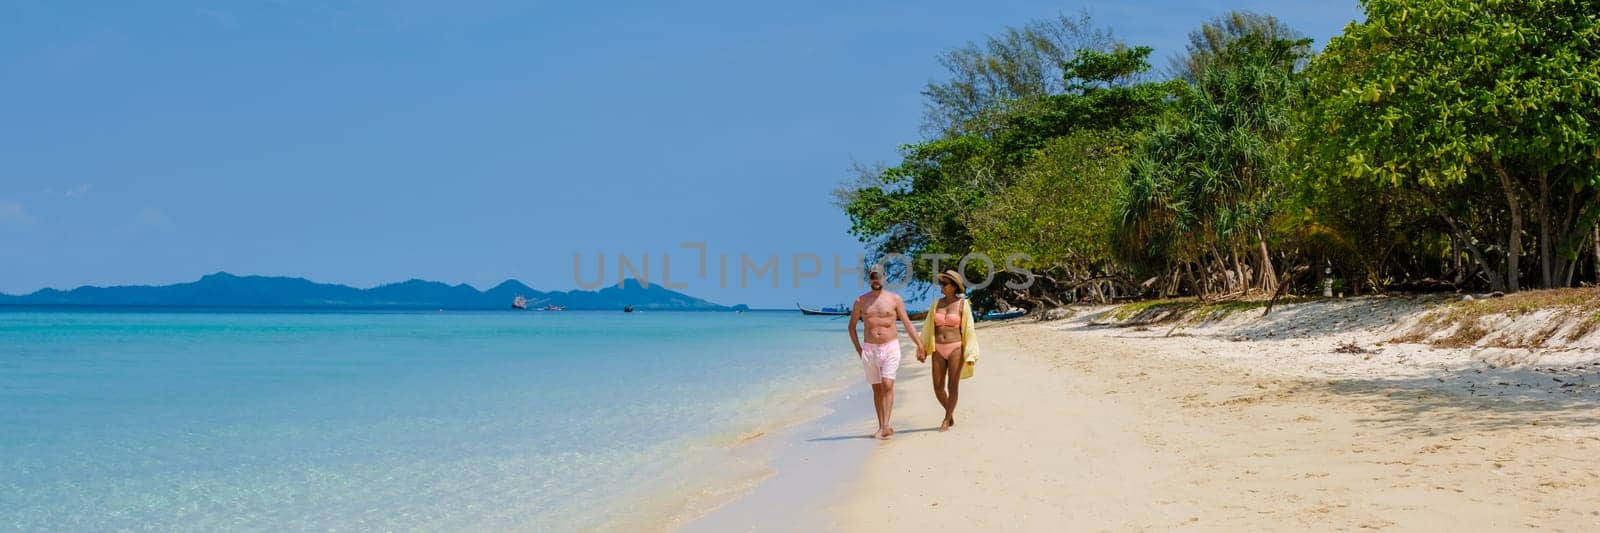 a couple of men and woman on the beach of Koh Kradan Island Thailand, men and women relaxing on the beach with a turqouse colored ocean